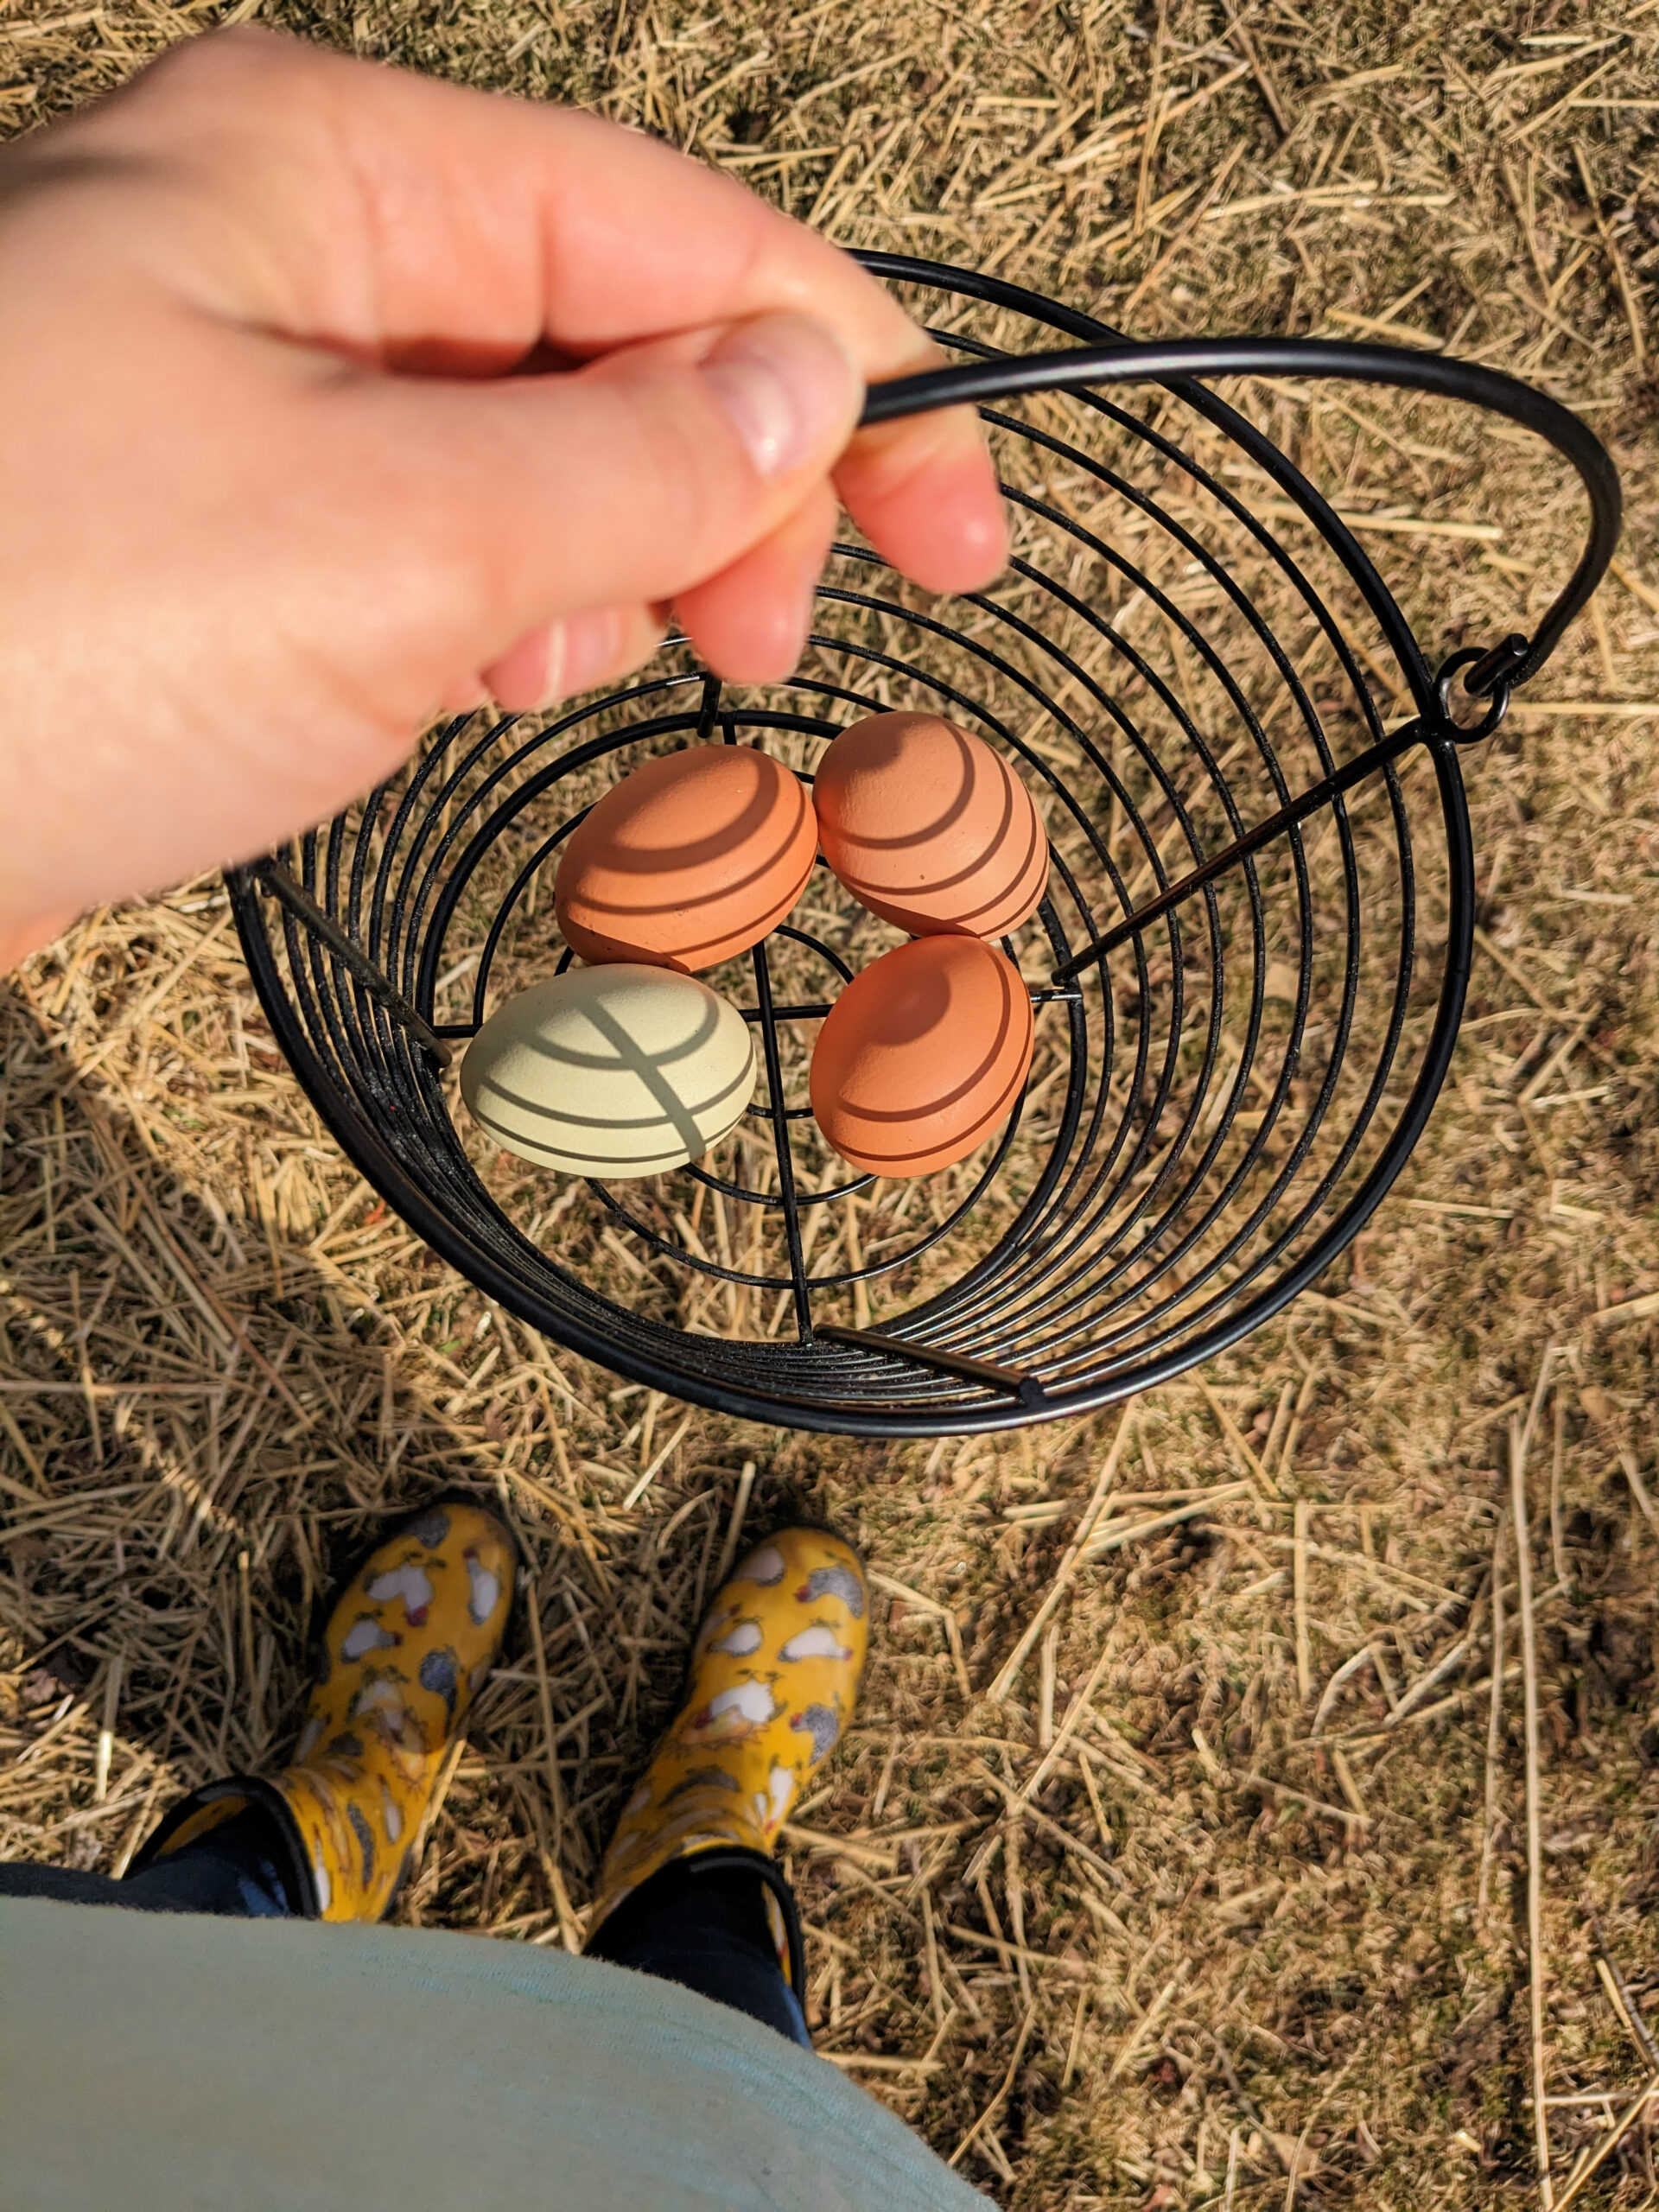 Holding a basket of eggs